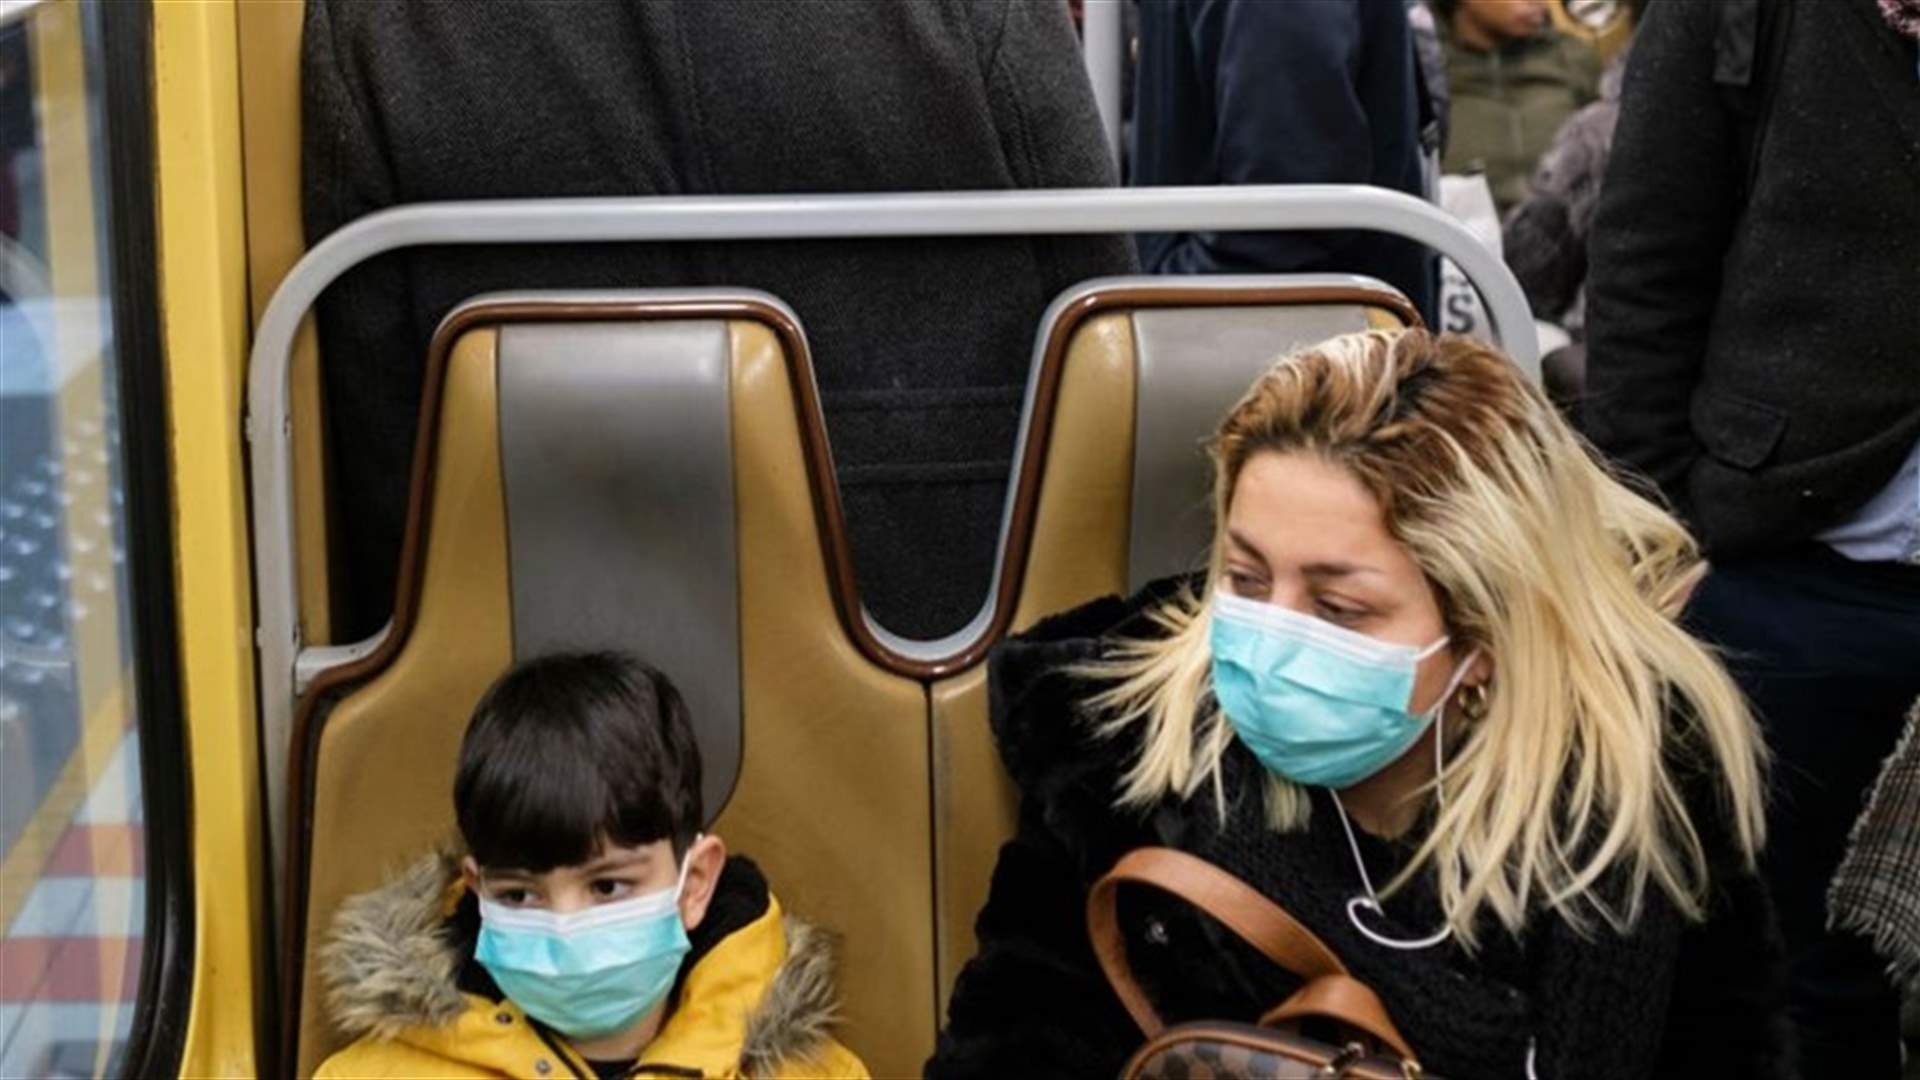 Masks do reduce spread of flu and some coronaviruses, study finds